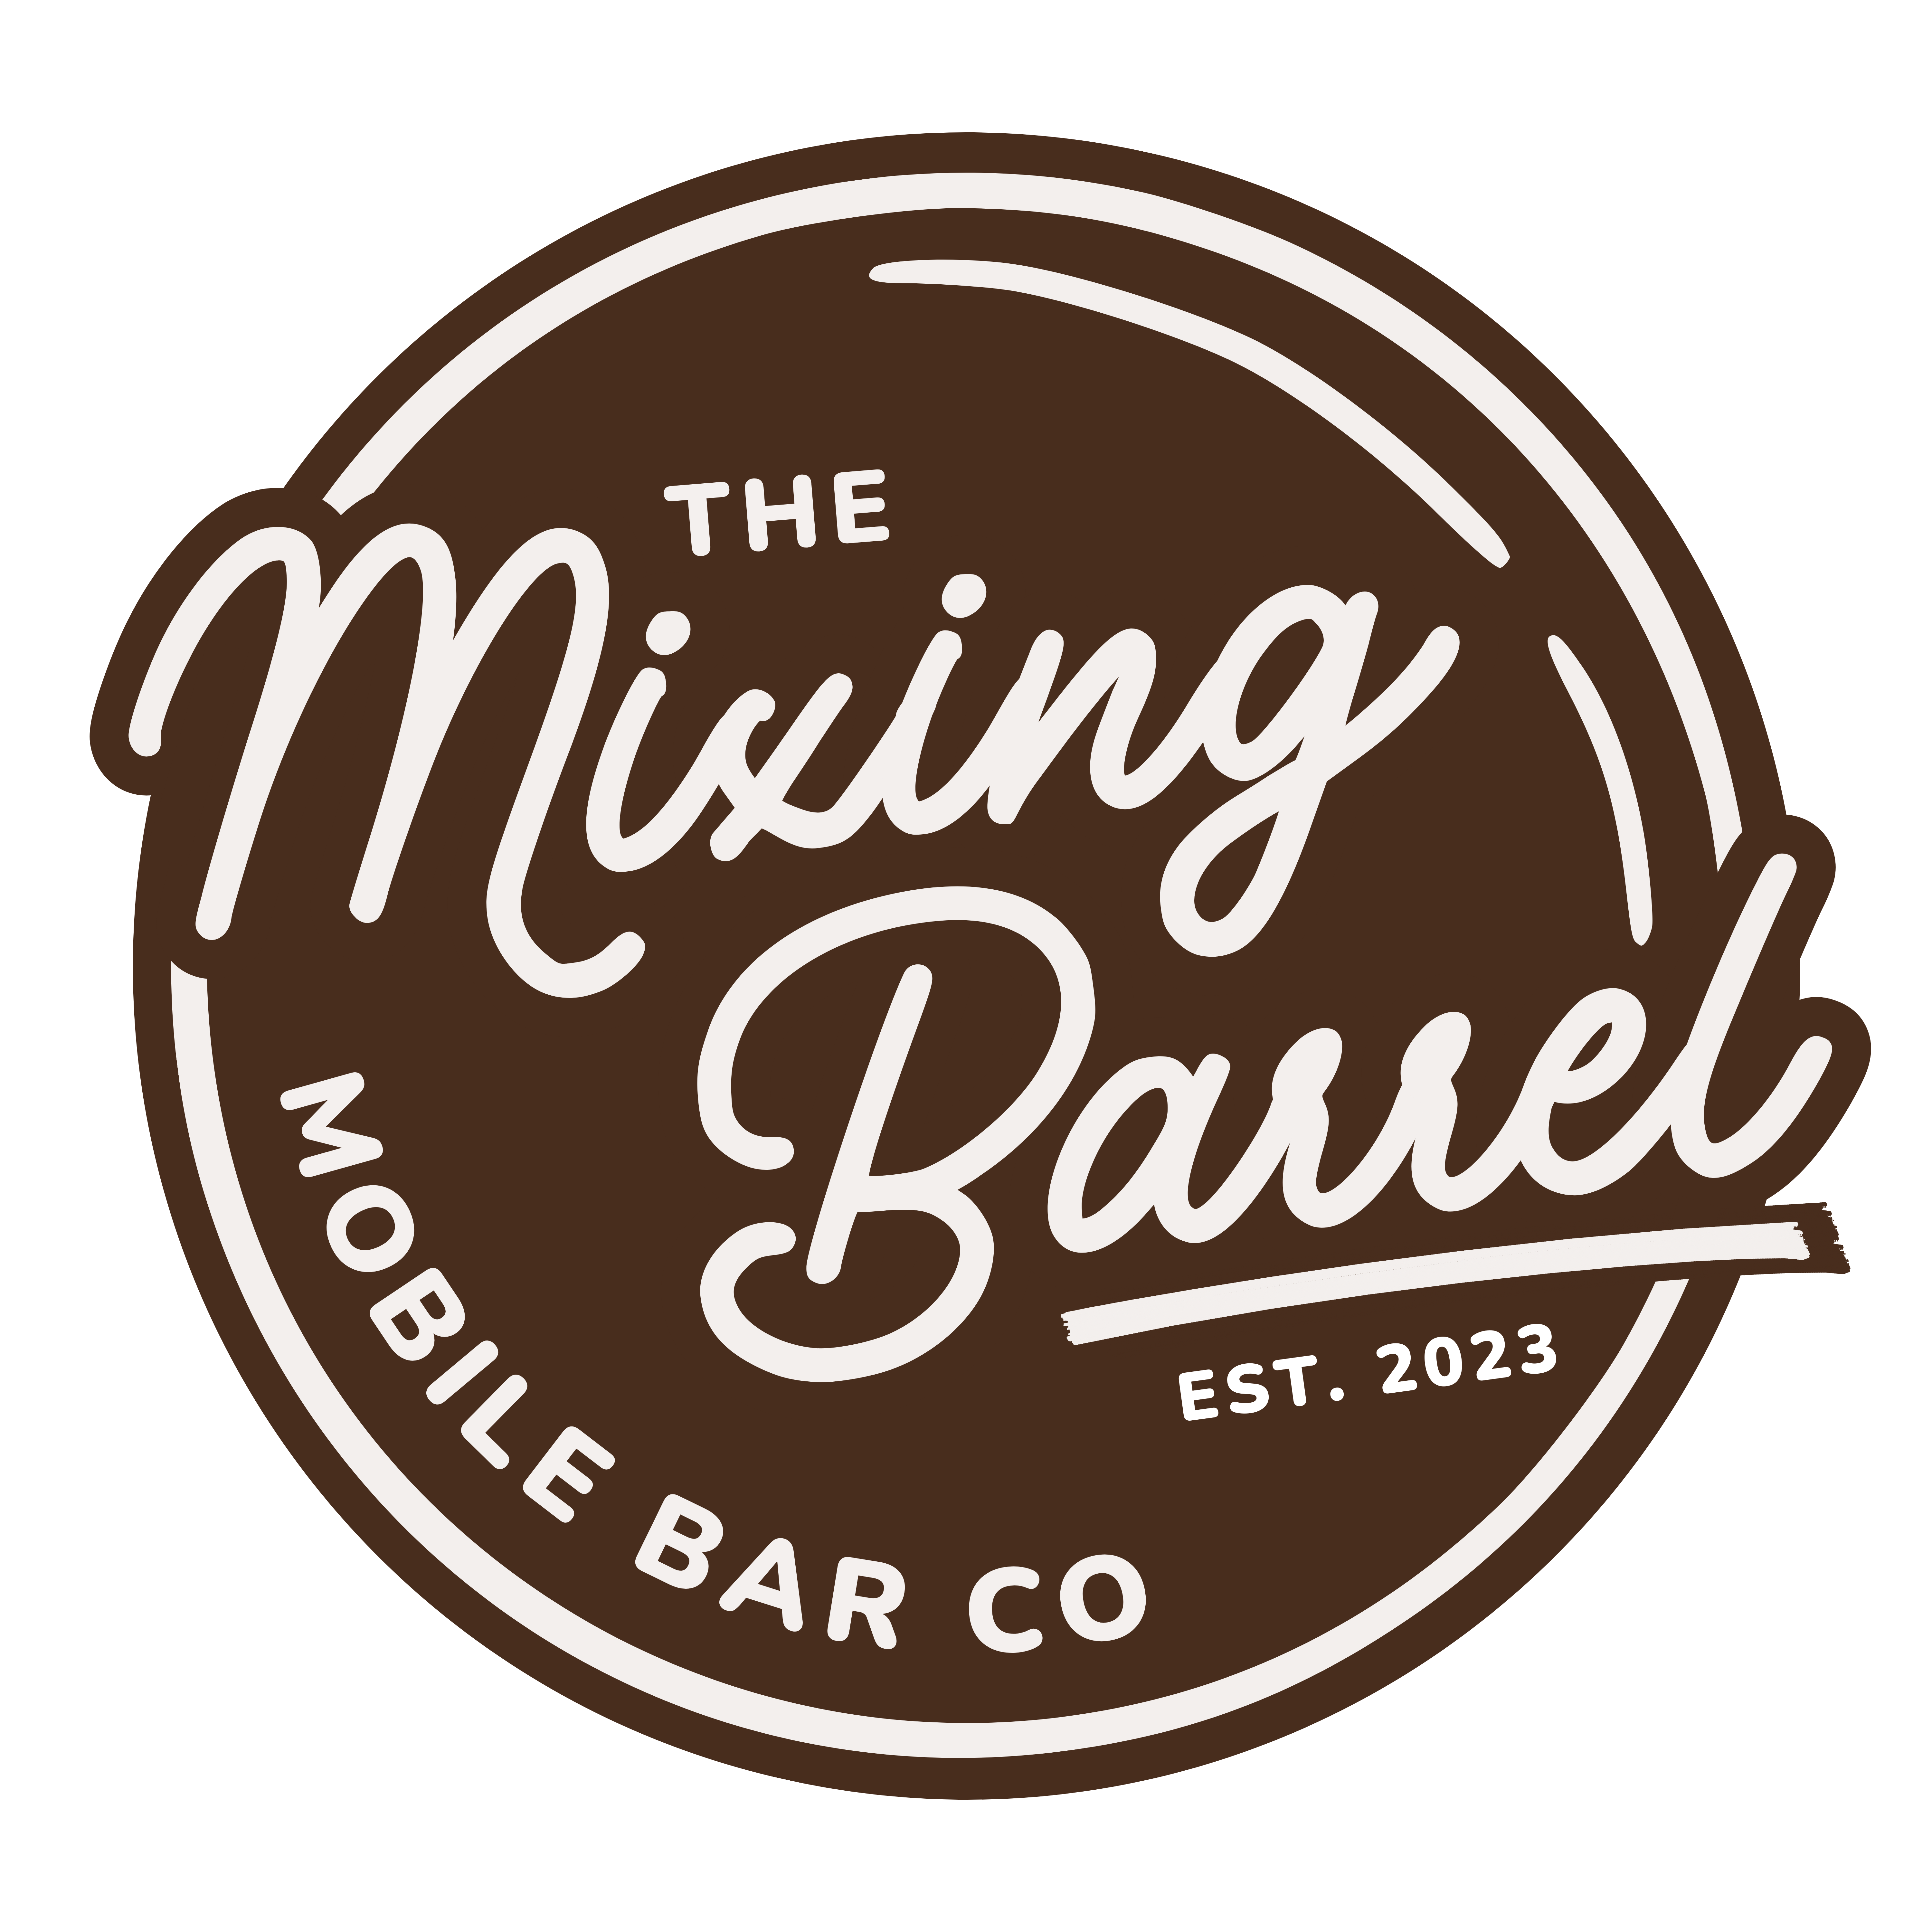 The Mixing Barrel Mobile Bar Co.